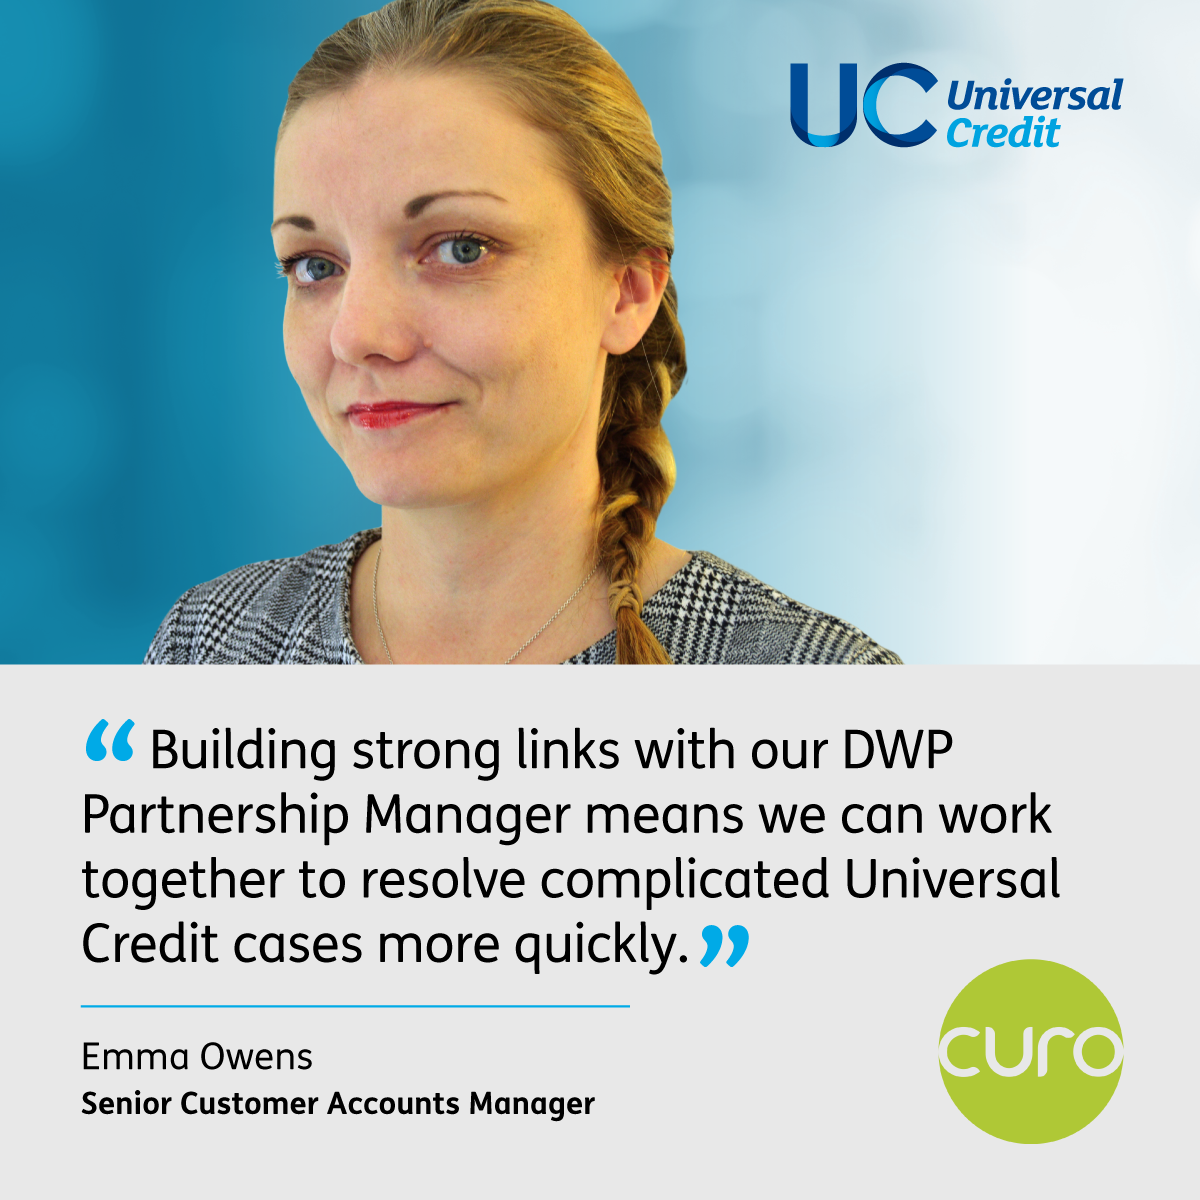 Photo of Emma Owens of Curo. Quote "Building strong links with our DWP Partnership Manager means we can work together to resolve complicated Universal Credit cases more quickly."